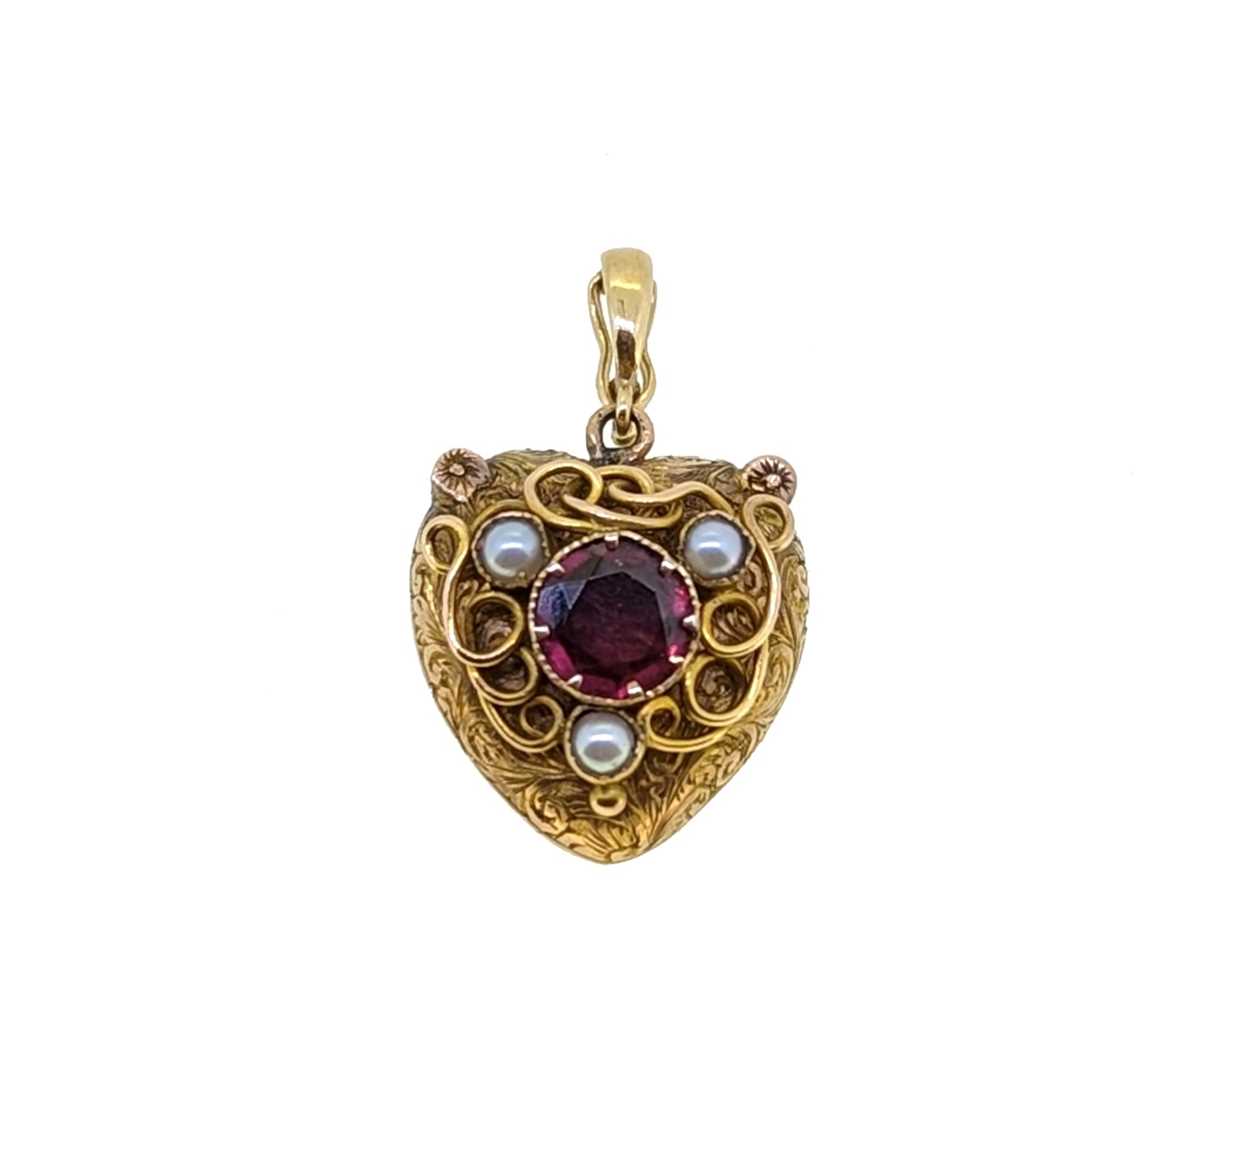 A 19th century foil backed garnet memorial heart pendant and ring, - Image 3 of 8